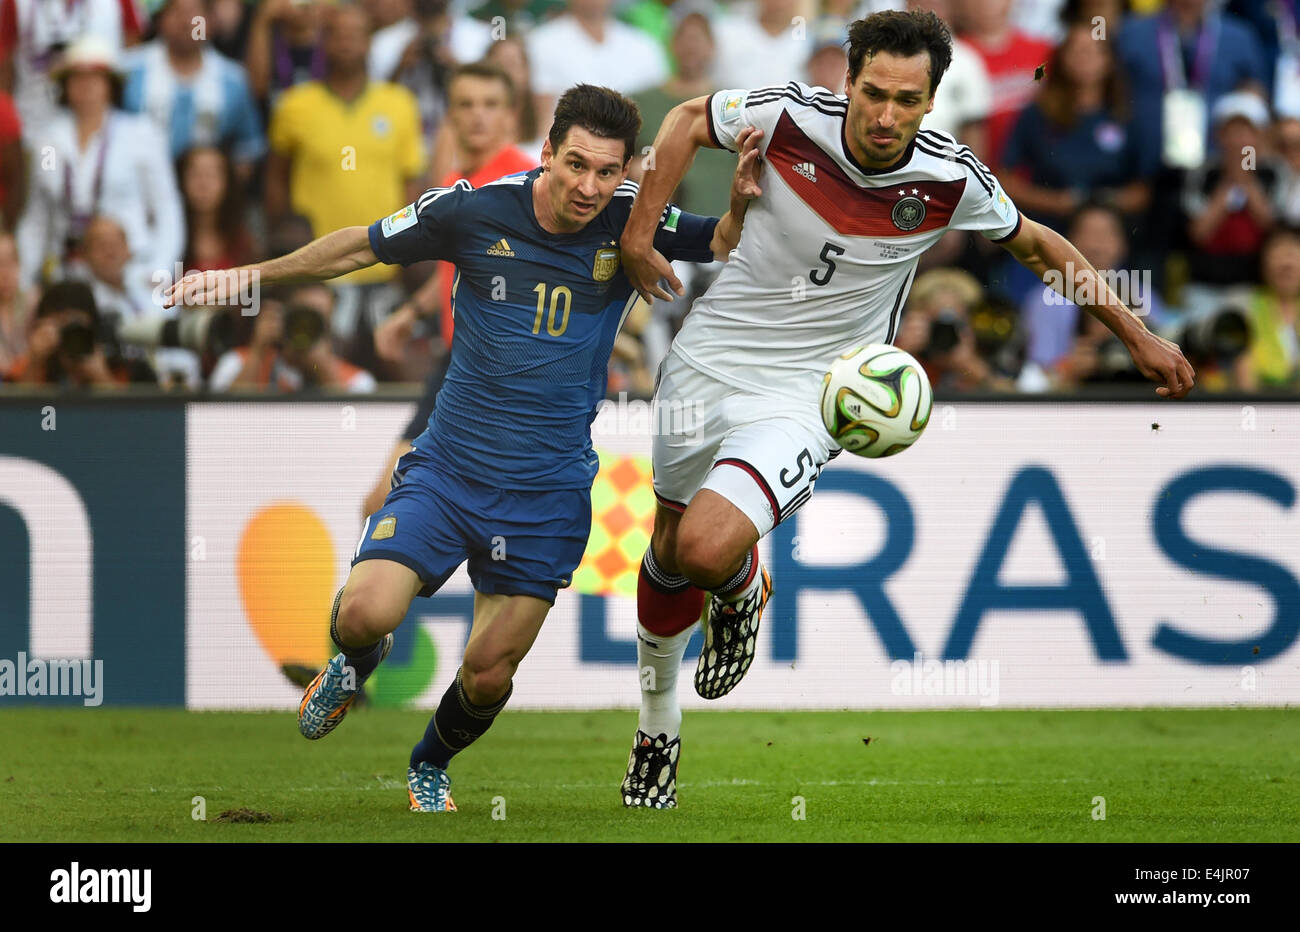 Rio de Janeiro, Brazil. 13th July, 2014. Mats Hummels of Germany (R) and Lionel Messi of Argentina during the FIFA World Cup 2014 final soccer match between Germany and Argentina at the Estadio do Maracana in Rio de Janeiro, Brazil, 13 July 2014. Photo: Andreas Gebert/dpa/Alamy Live News Stock Photo